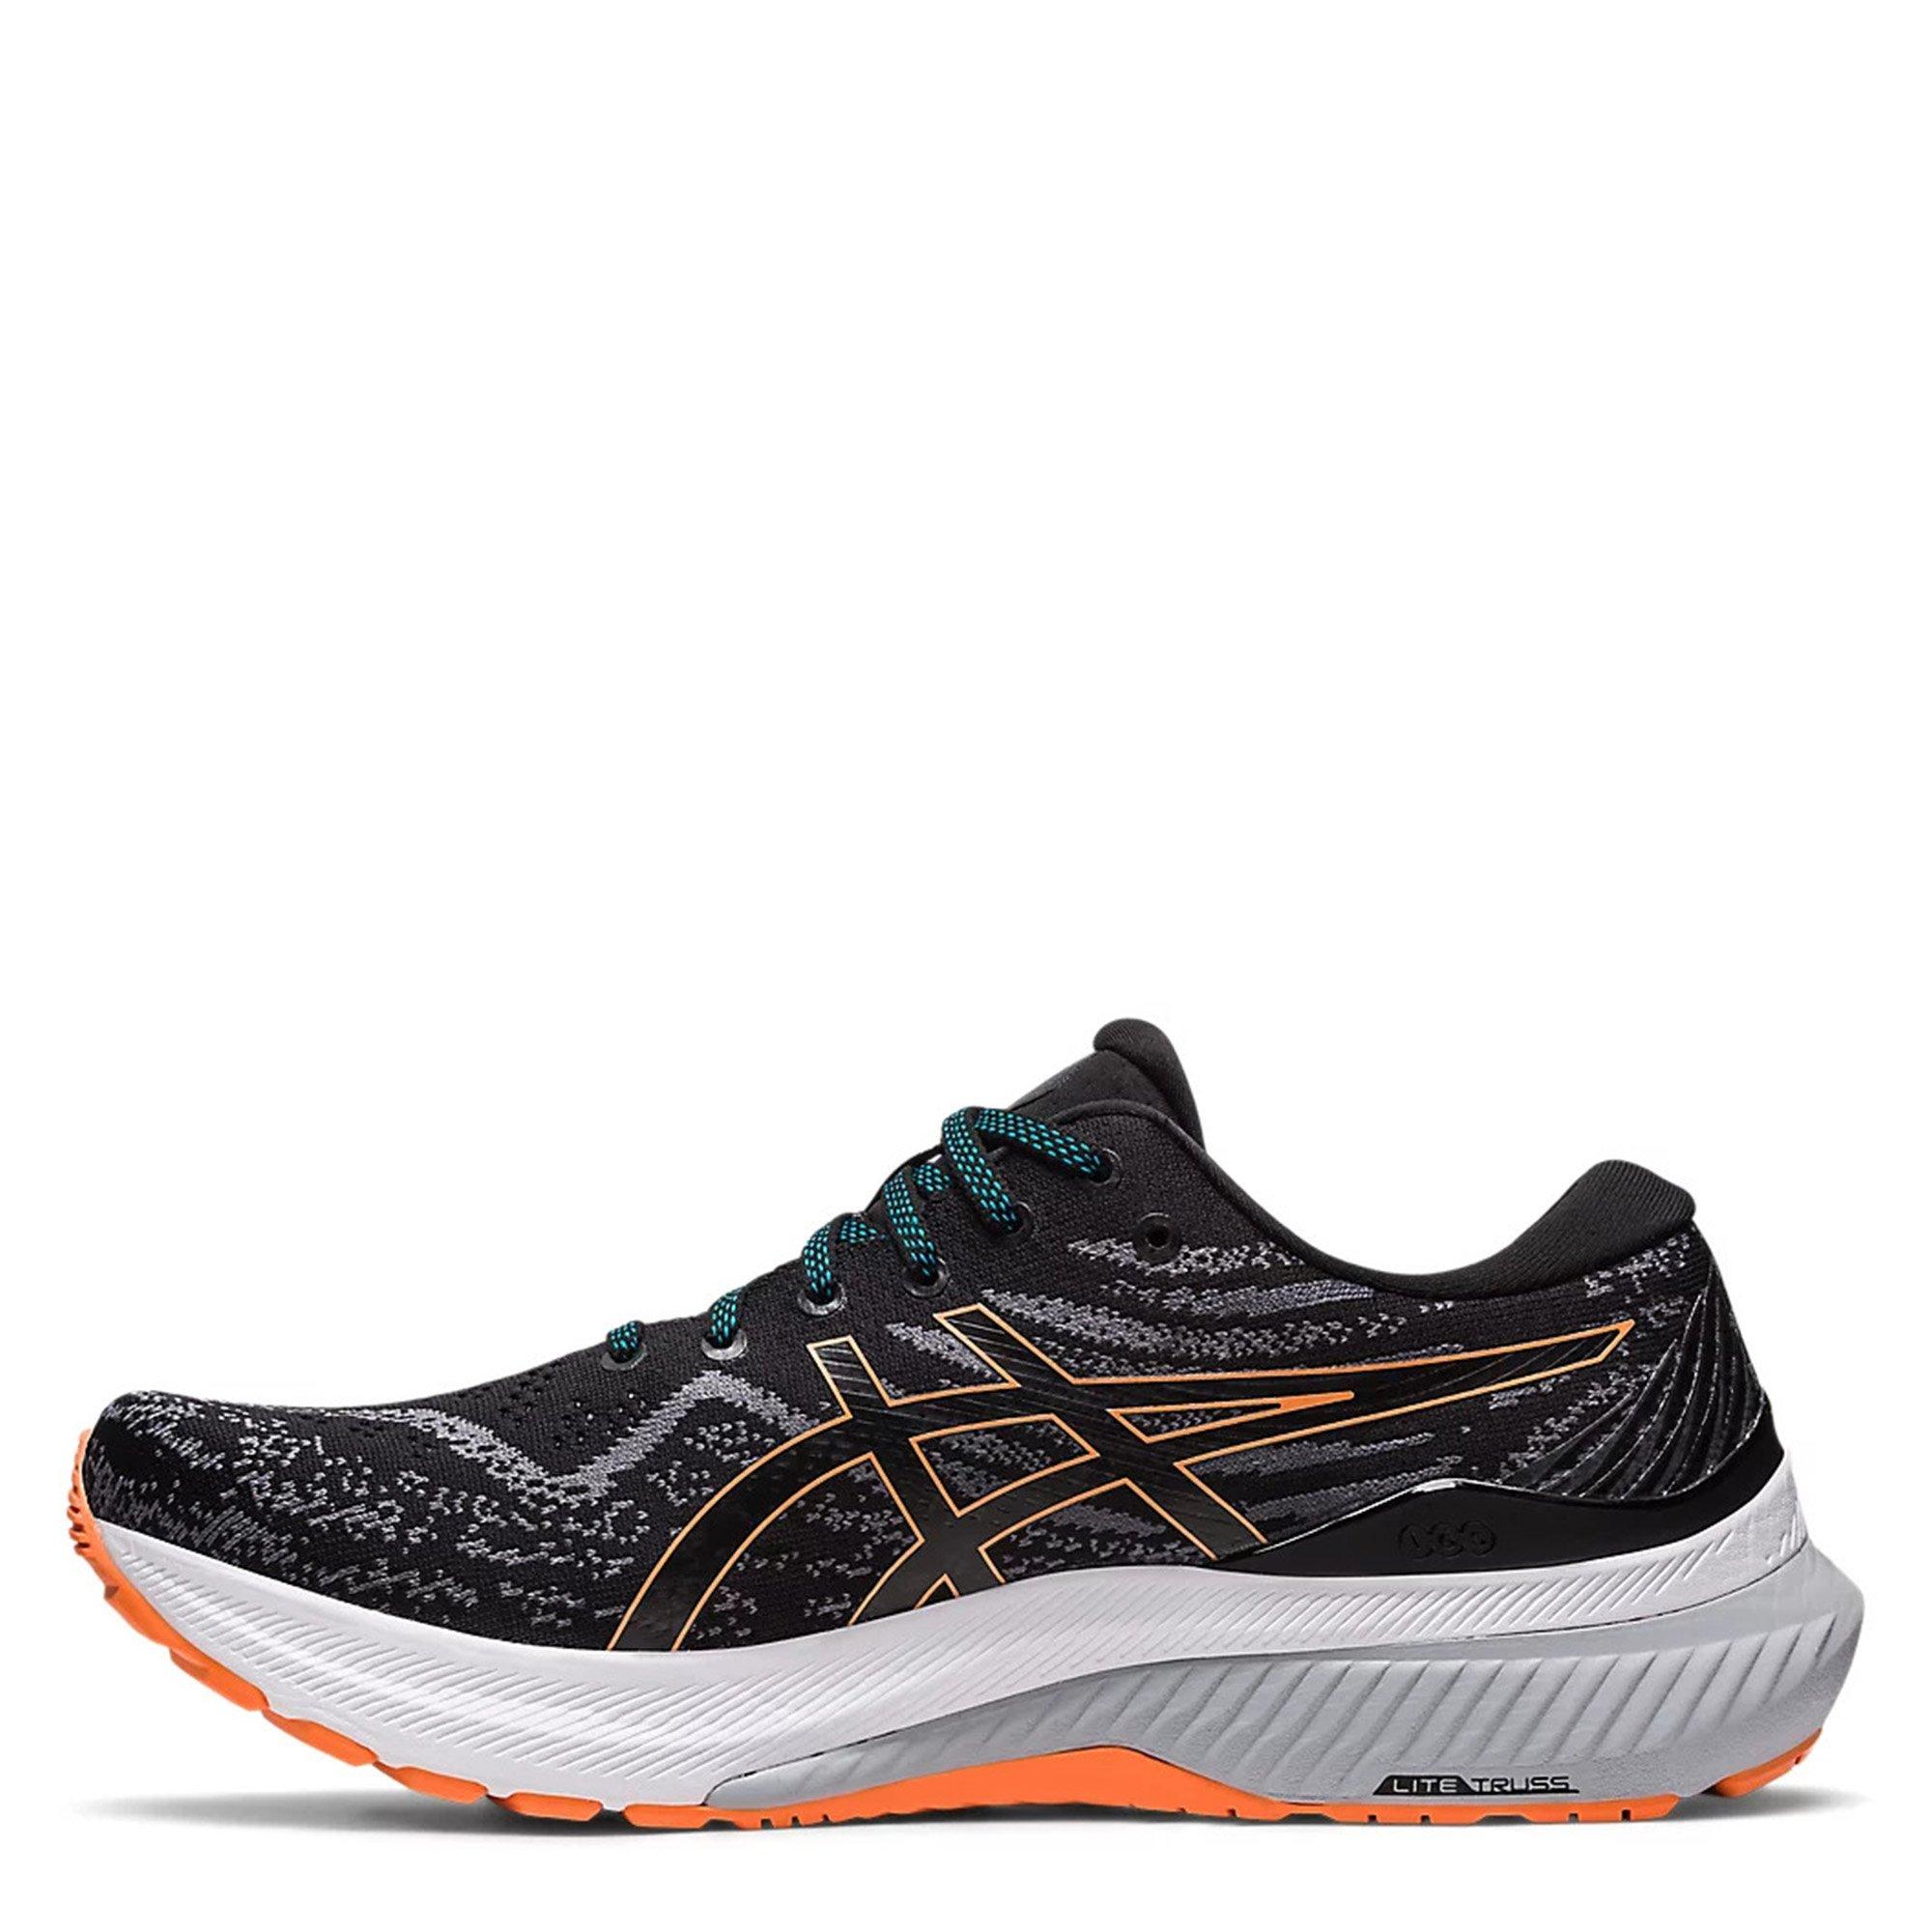 Asics | GEL Kayano 29 Mens Running Shoes | Everyday Stable Road Running ...